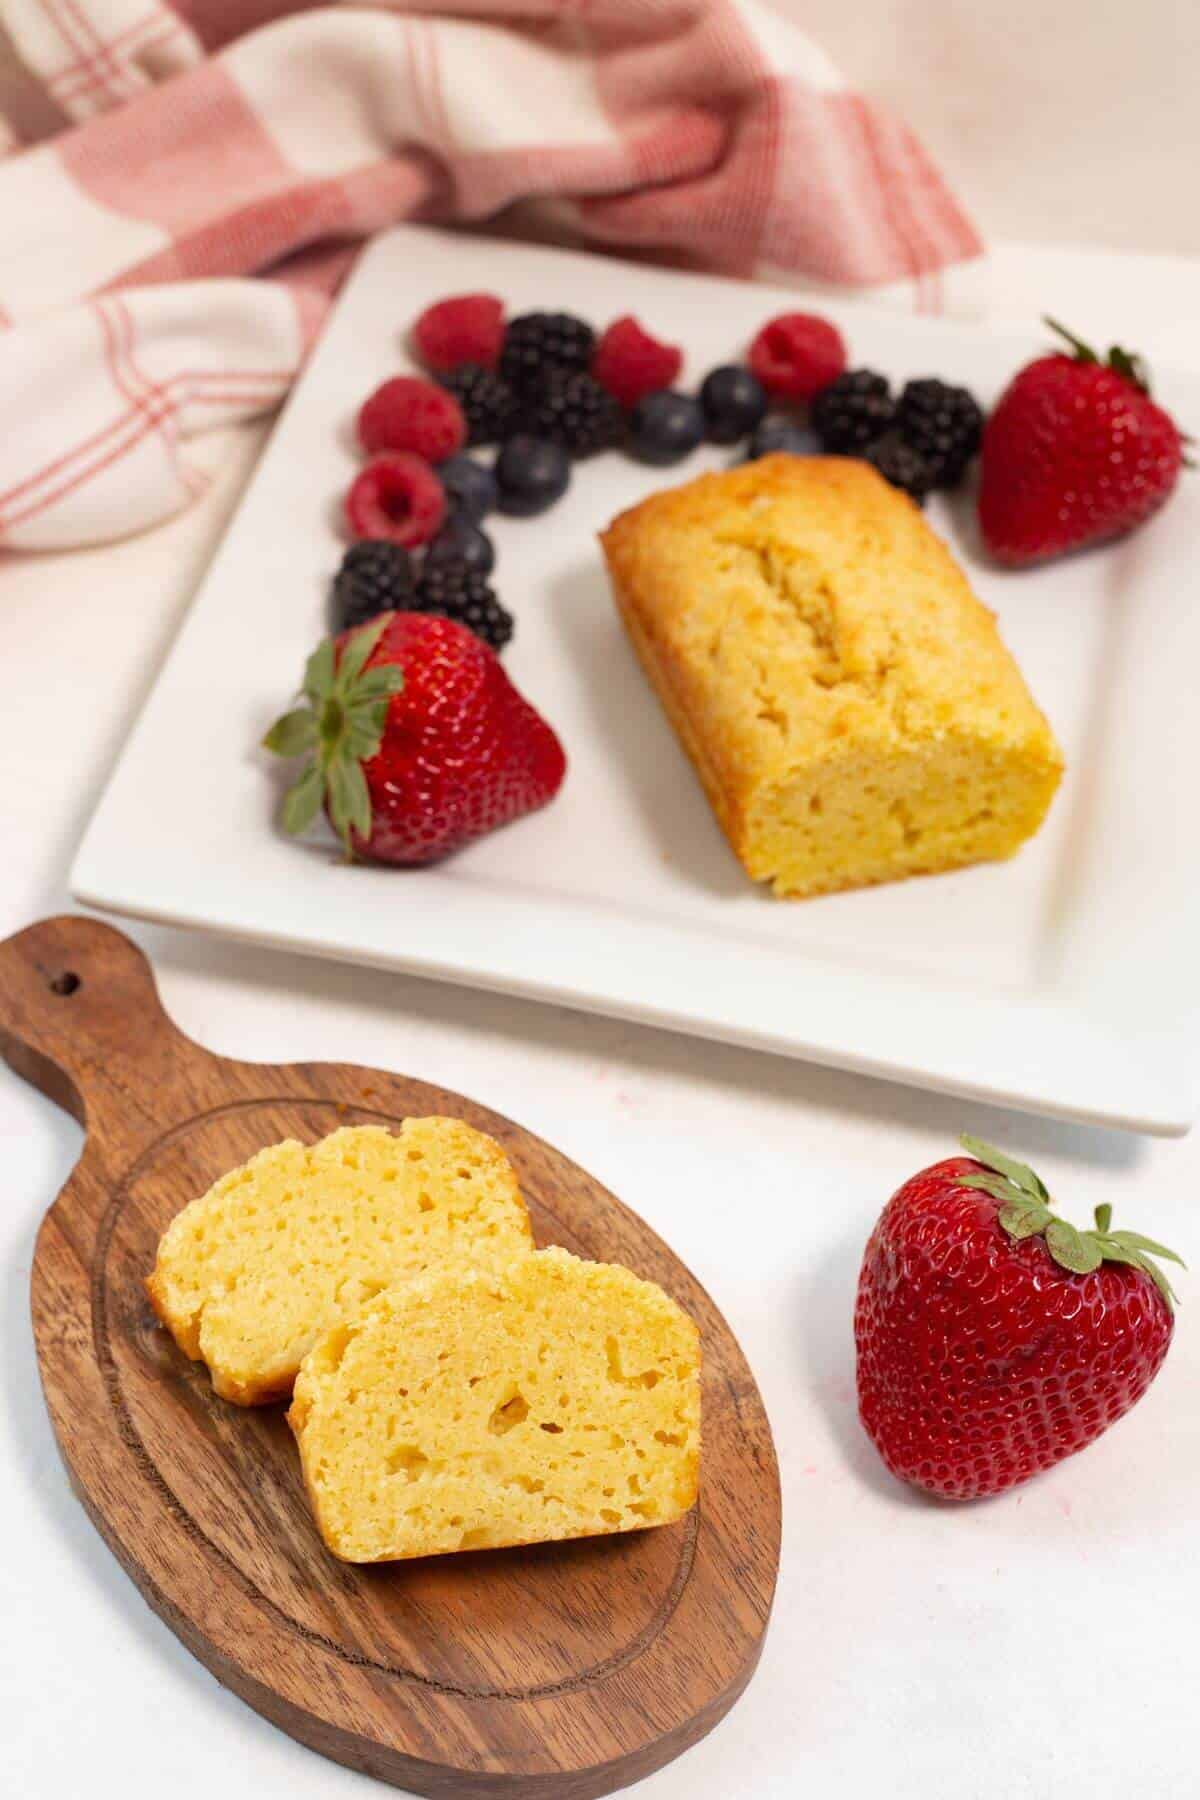 Pound cake on square plate with slices on cutting board.